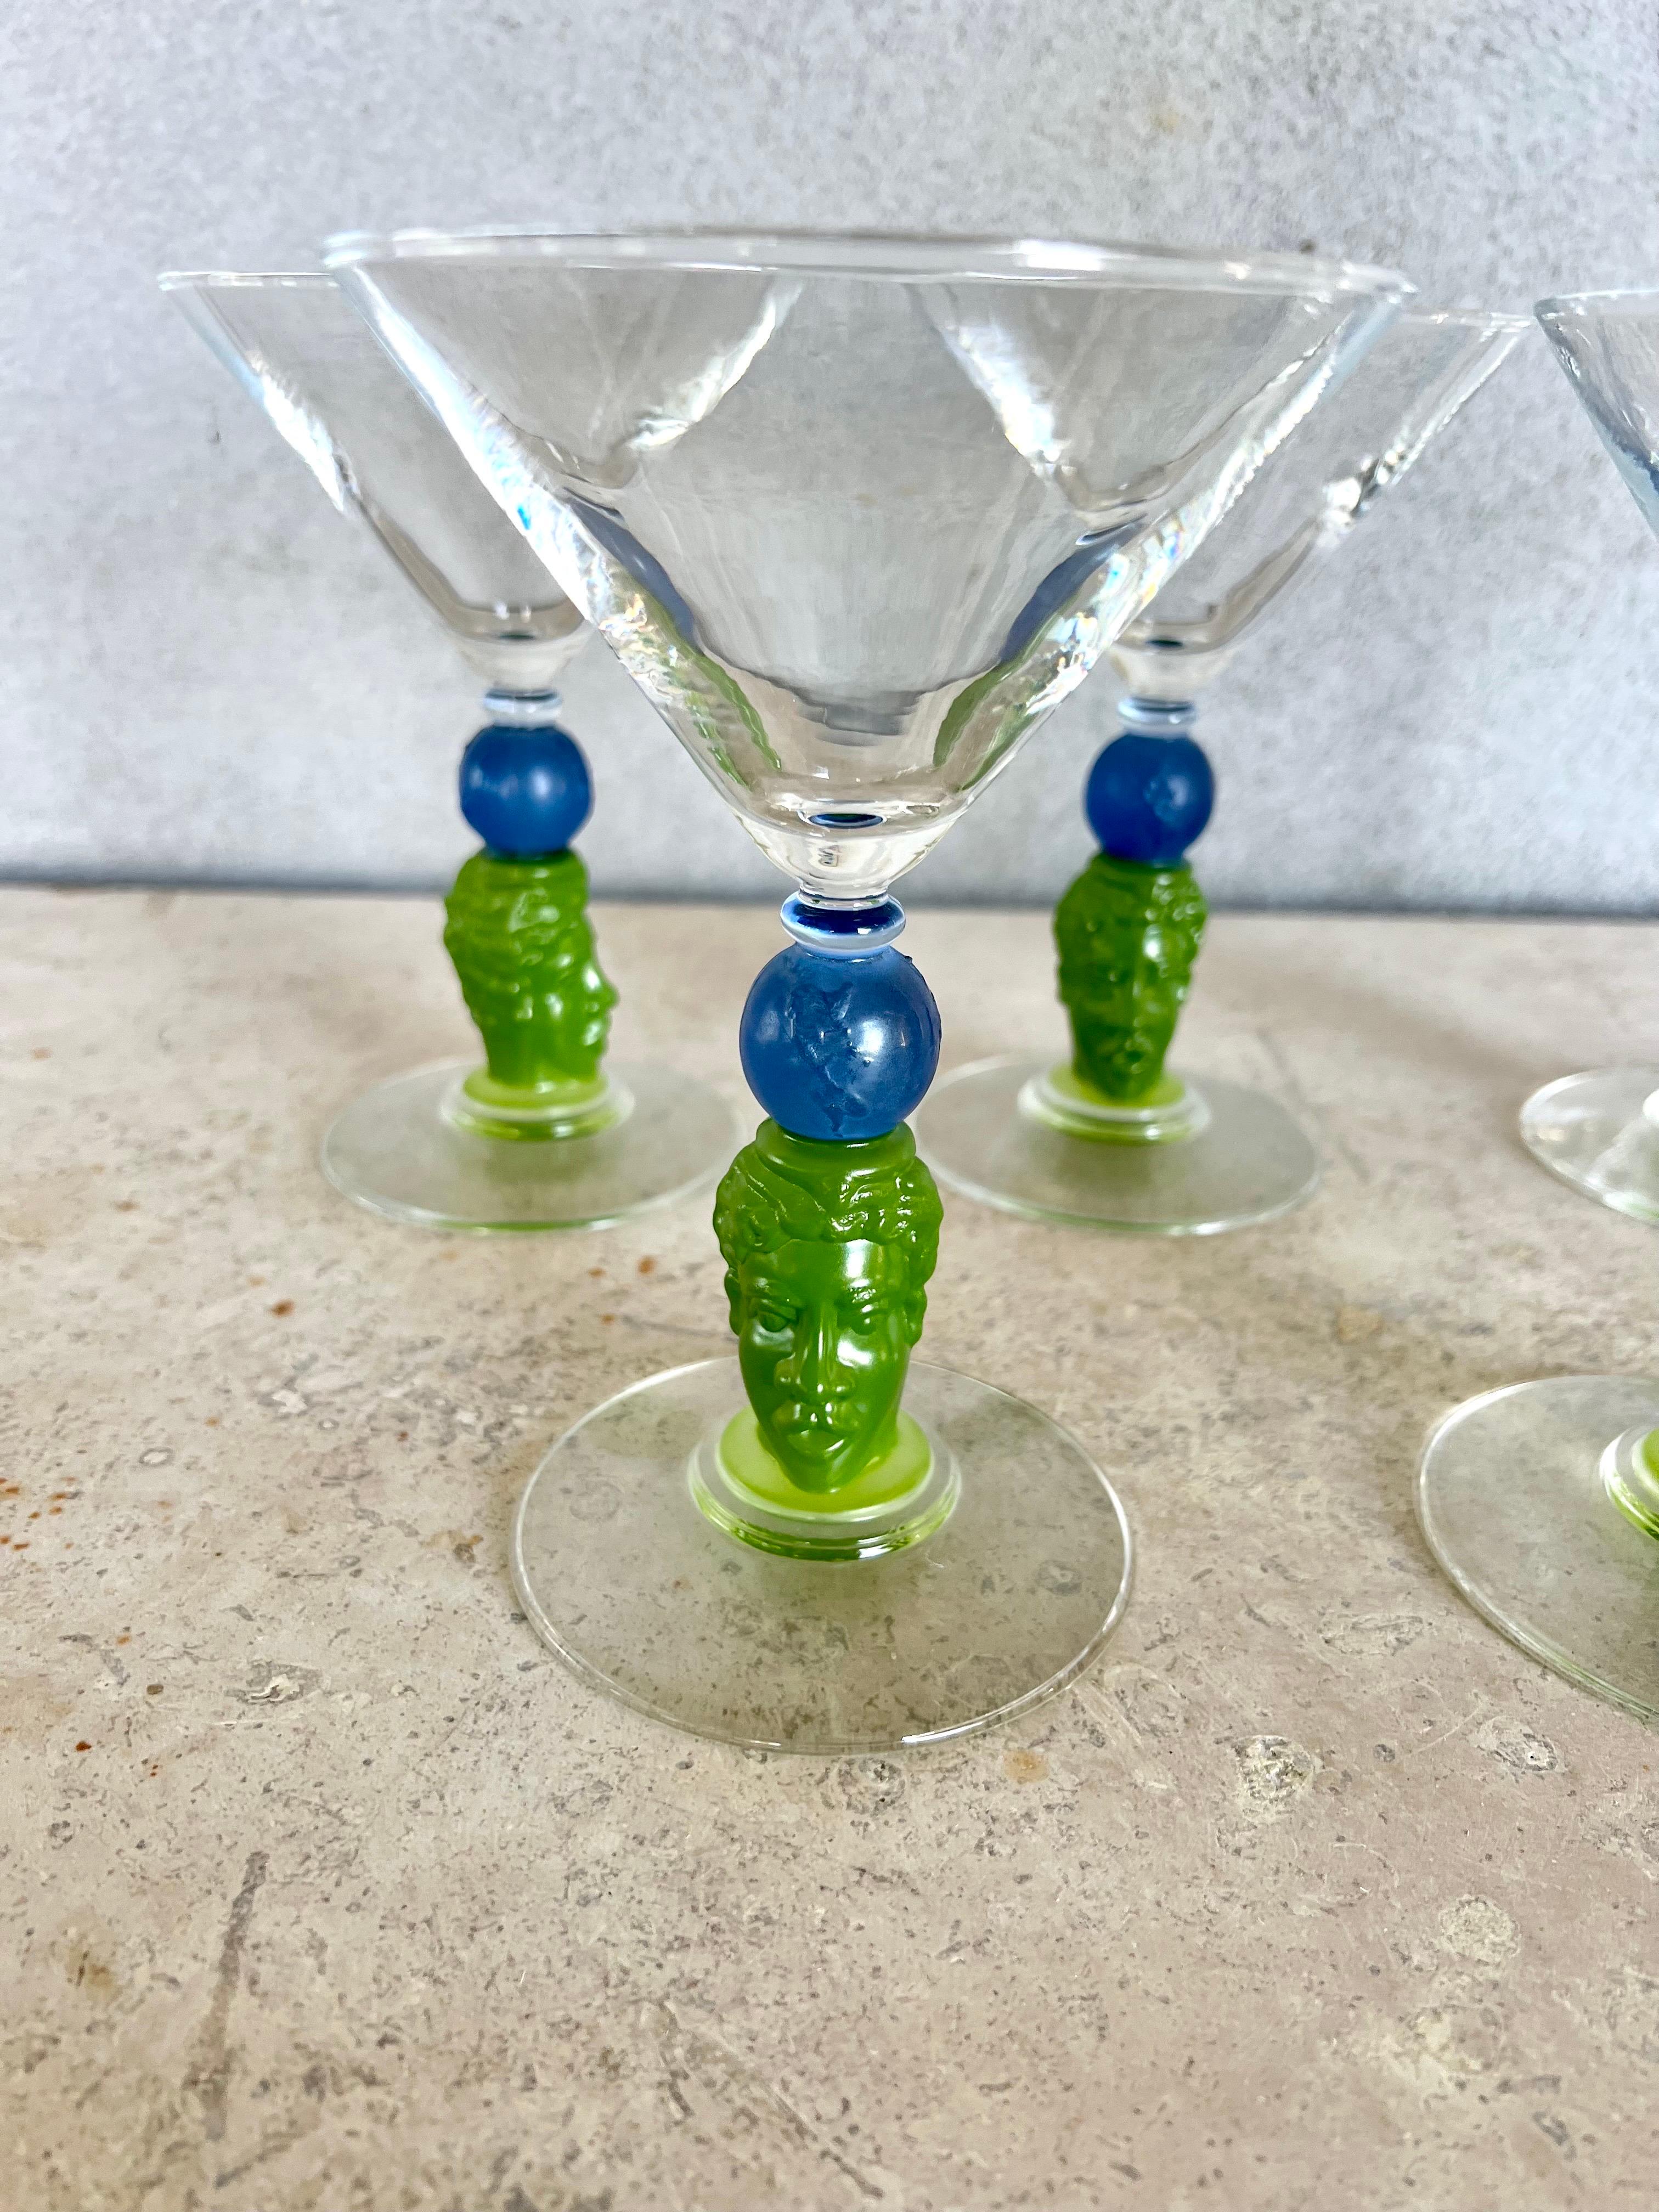 Five perfect sculptural signed glass barware by Richard Jolley in beautiful hues of green and blue glass with clear top and bottom. The stem is a carved face that he is known for with the world resting on top of it.These were a limited edition are